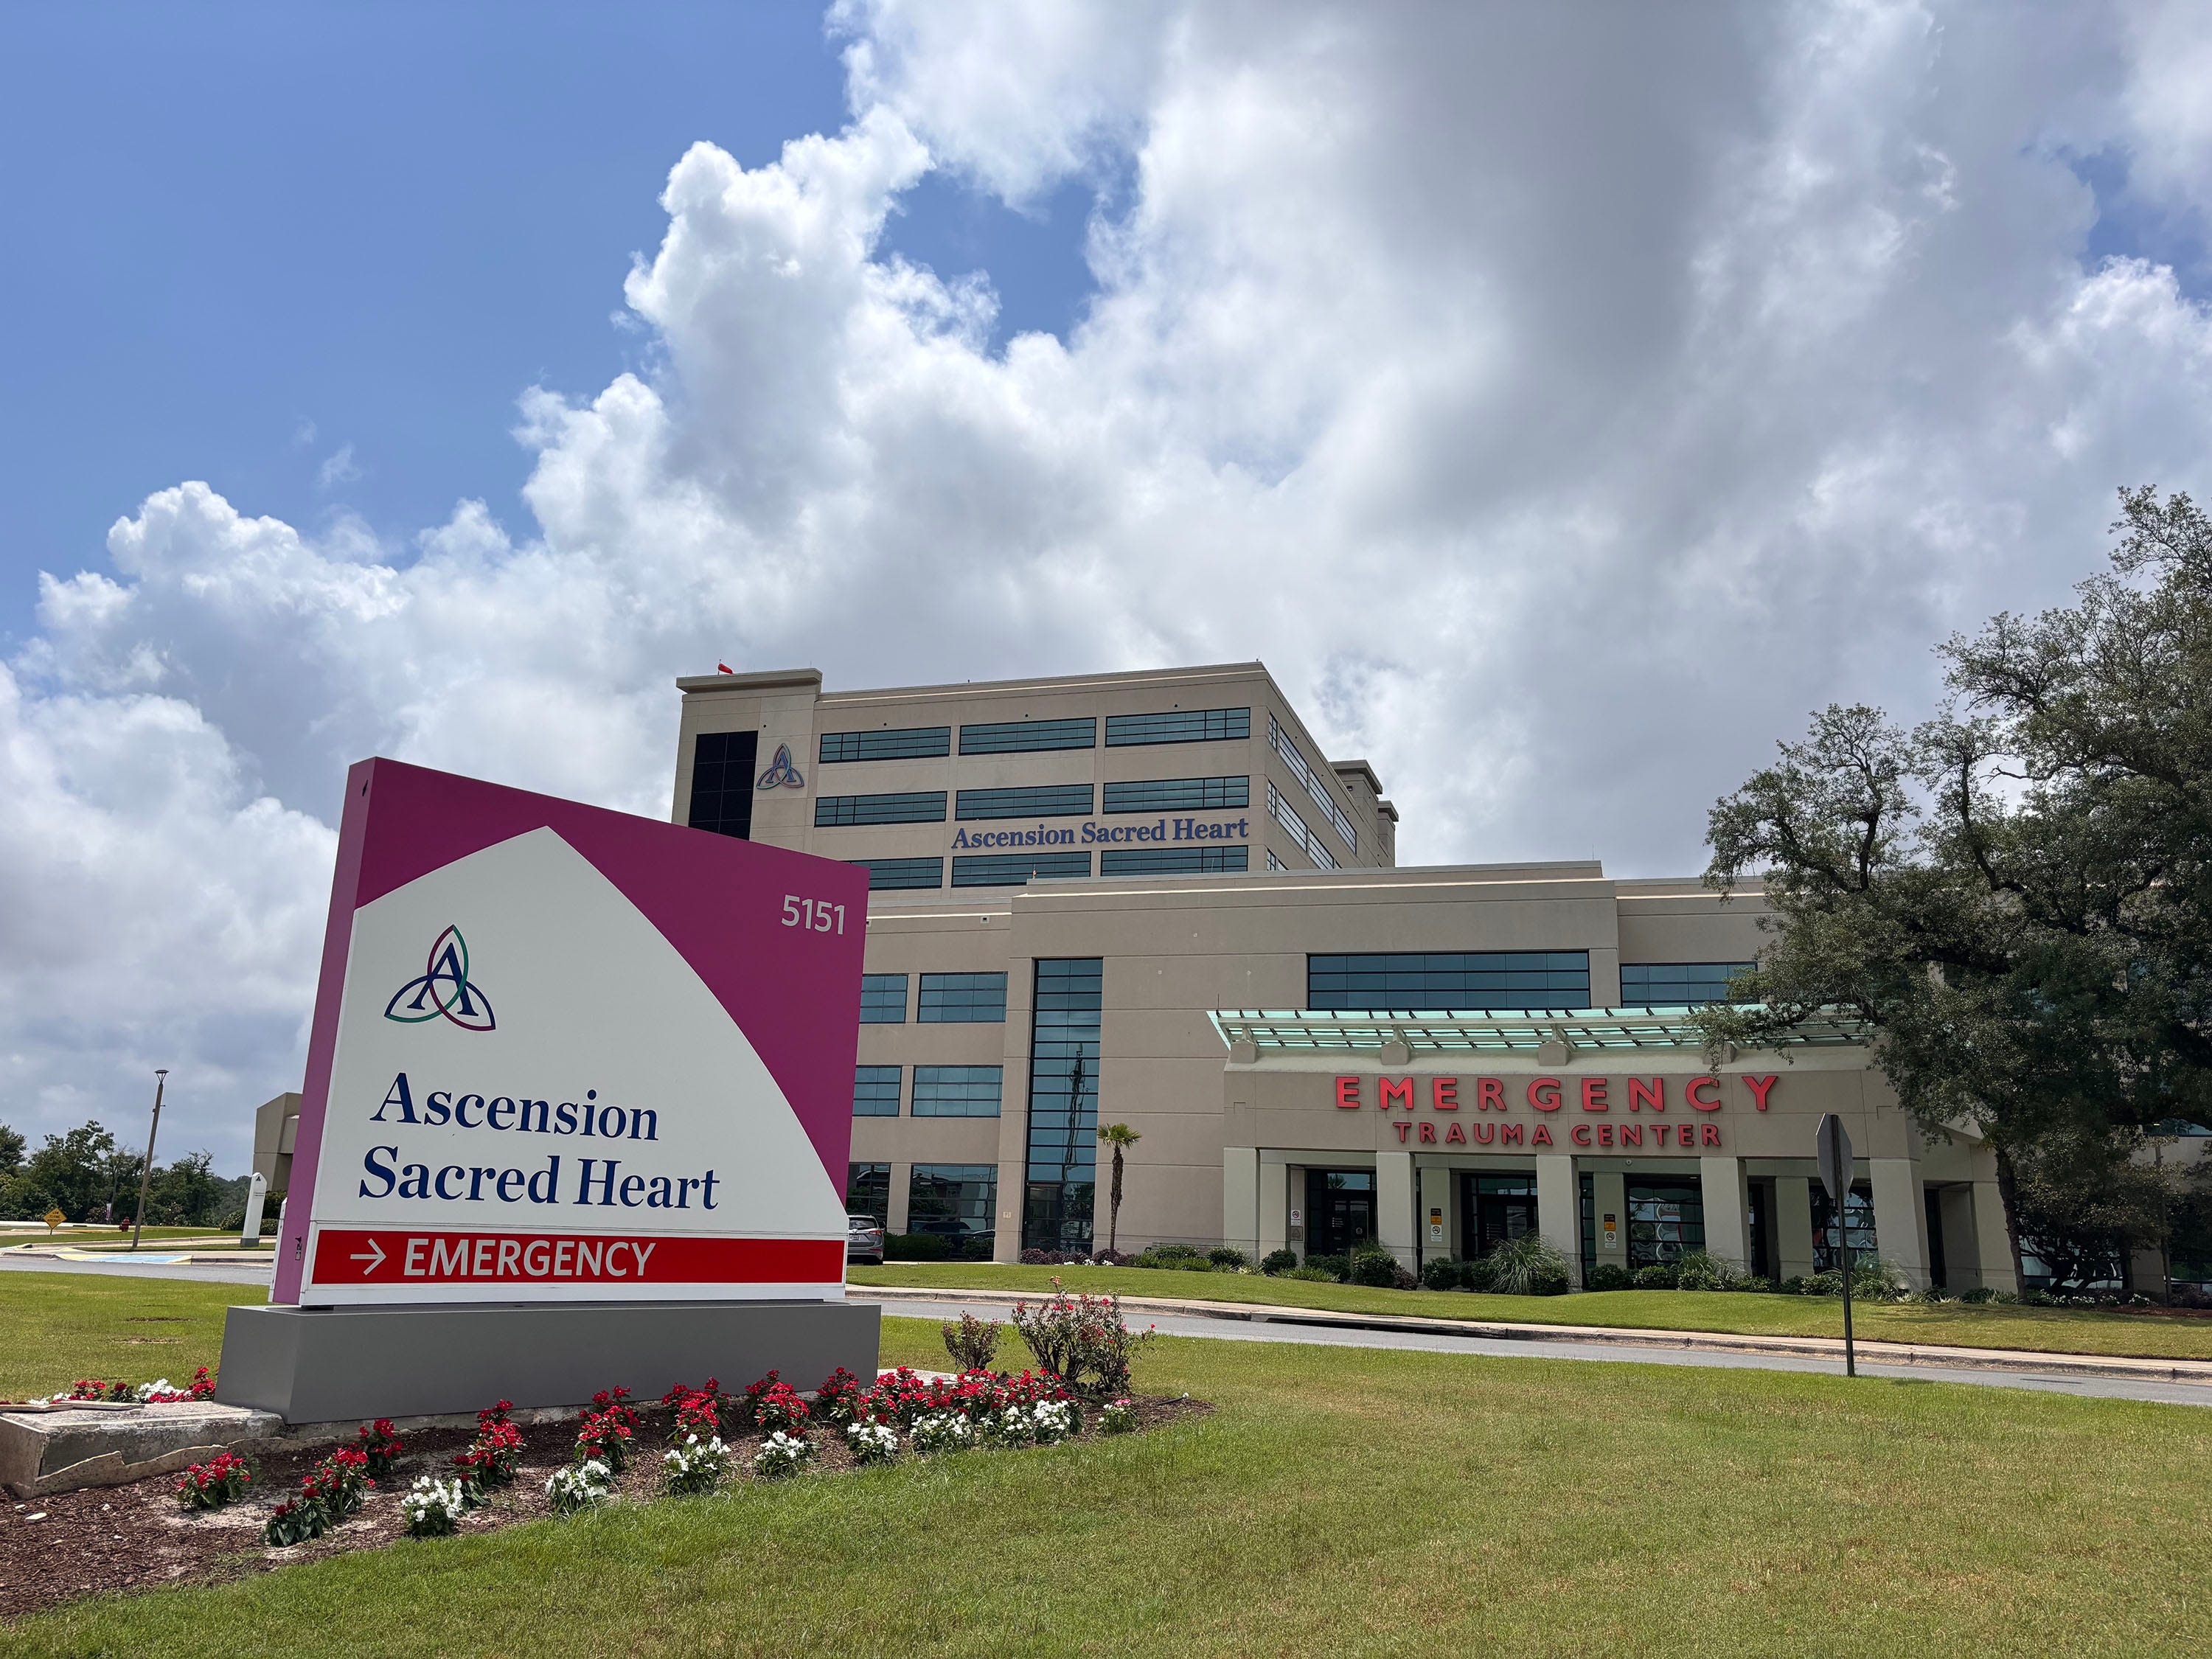 Ascension hospitals facing widespread cyberattack. Here's what we know so far